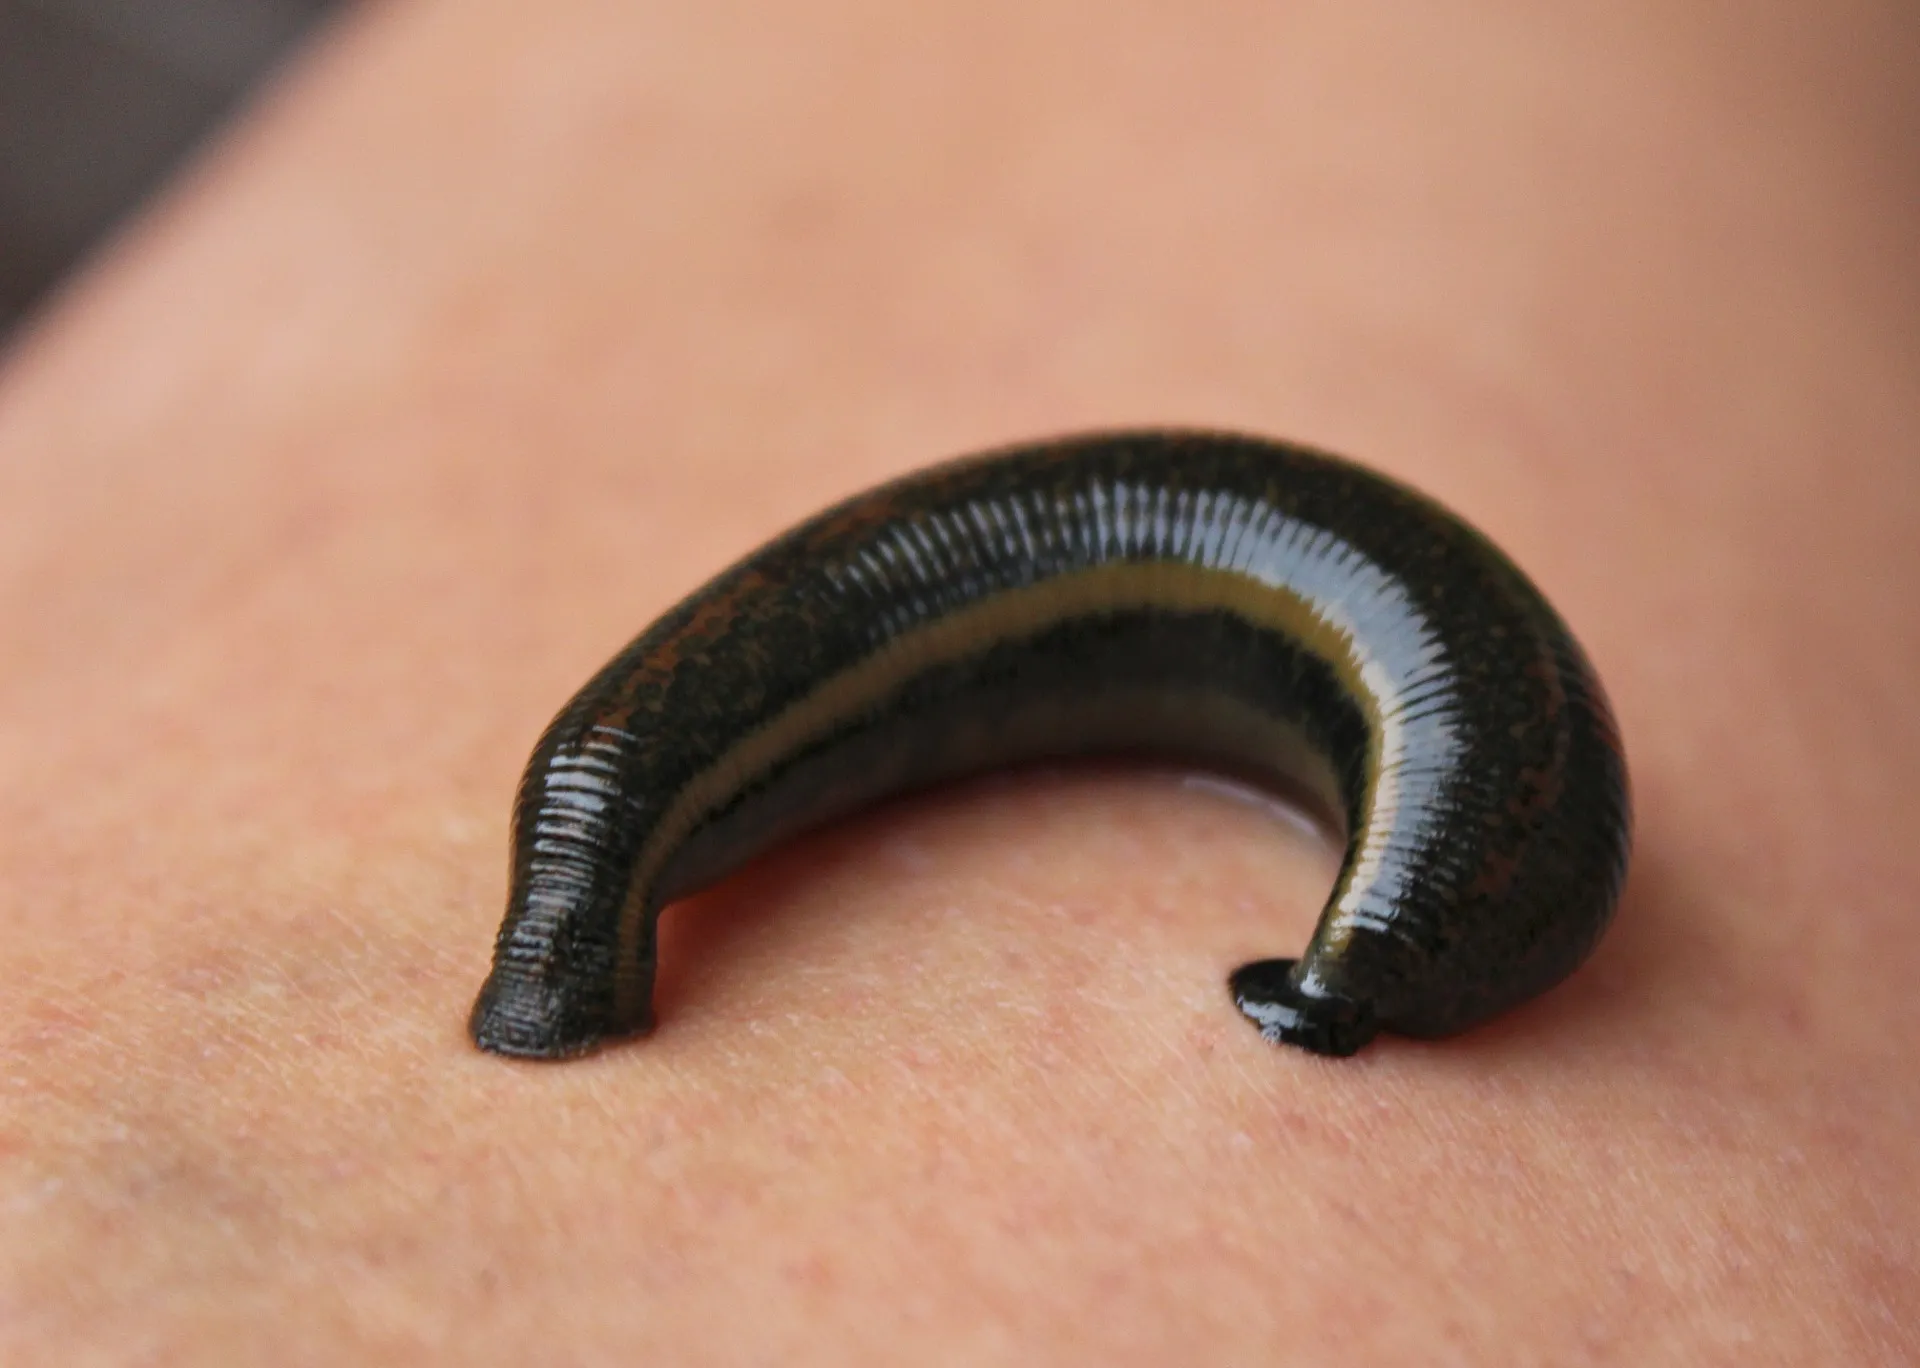 Medical leeches. (Not a Chinese therapy)